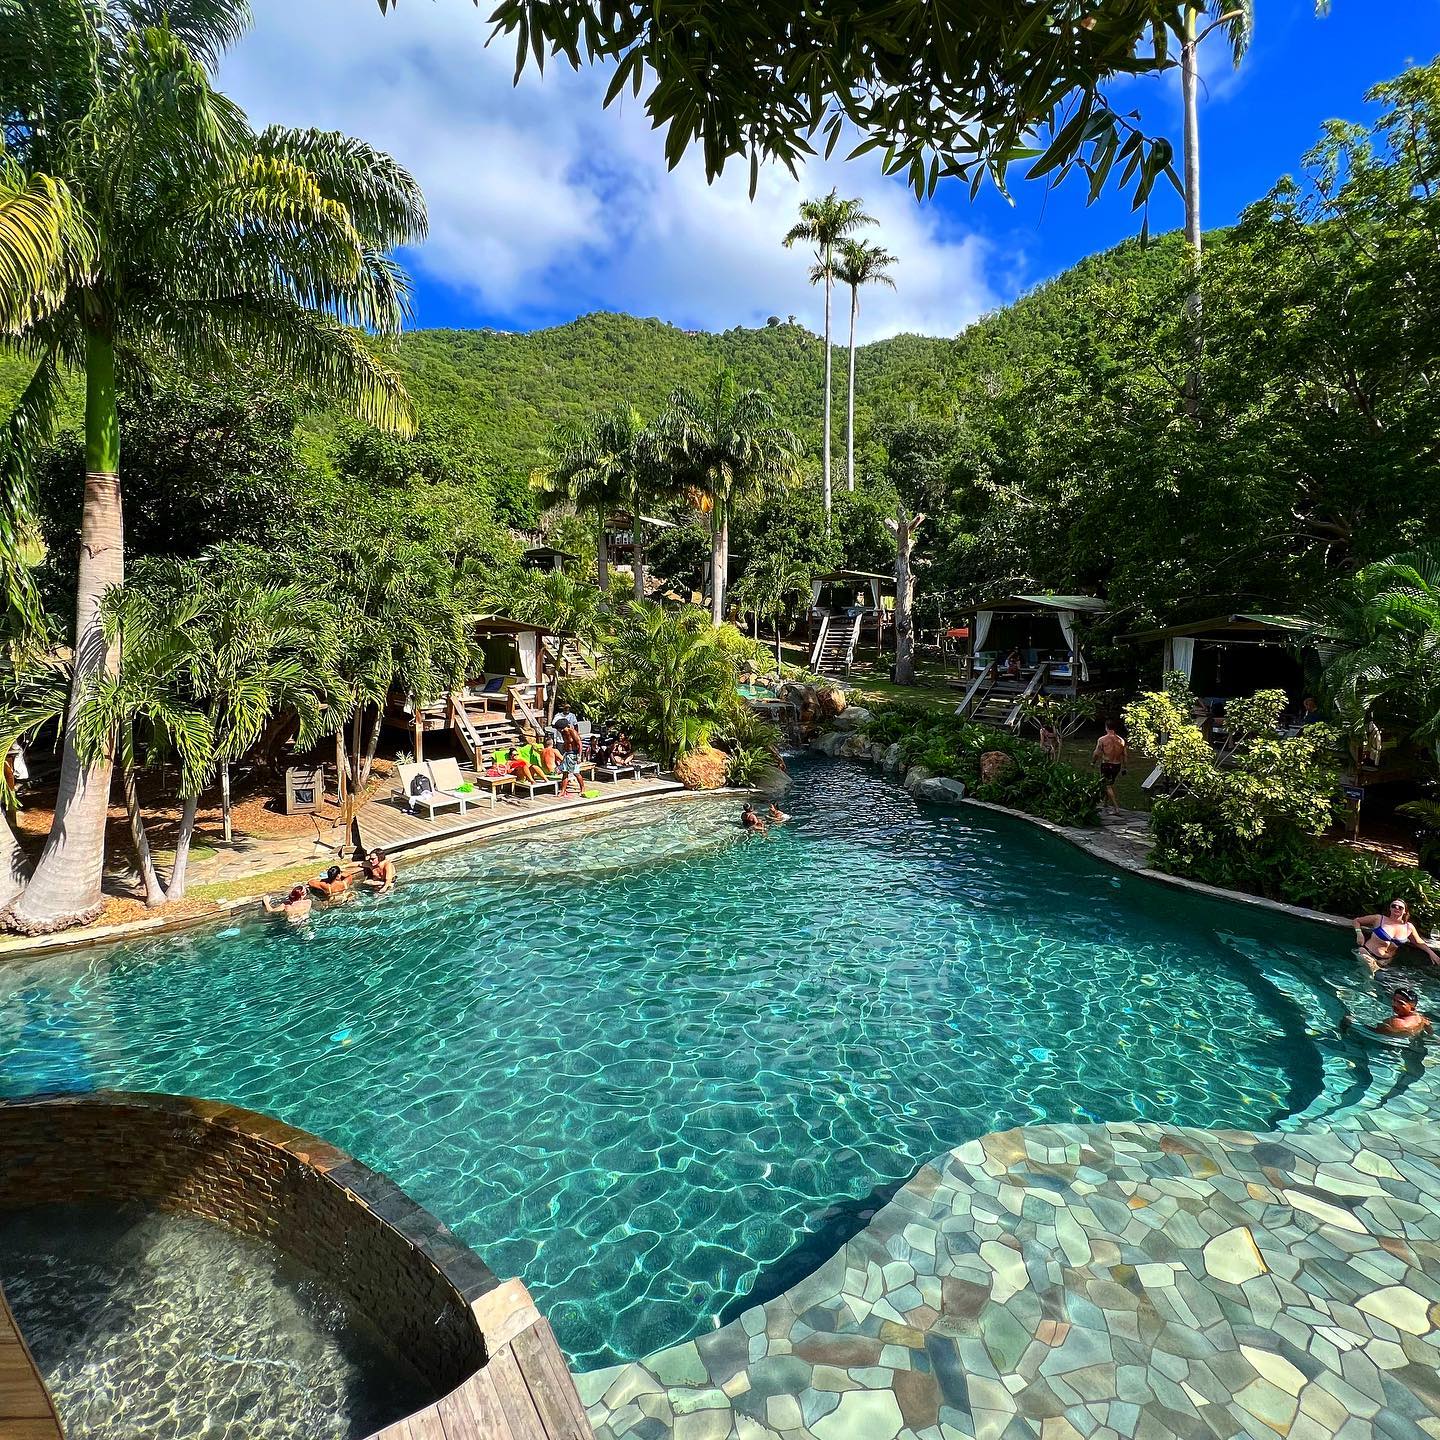 Pool located at loterie farm sxm